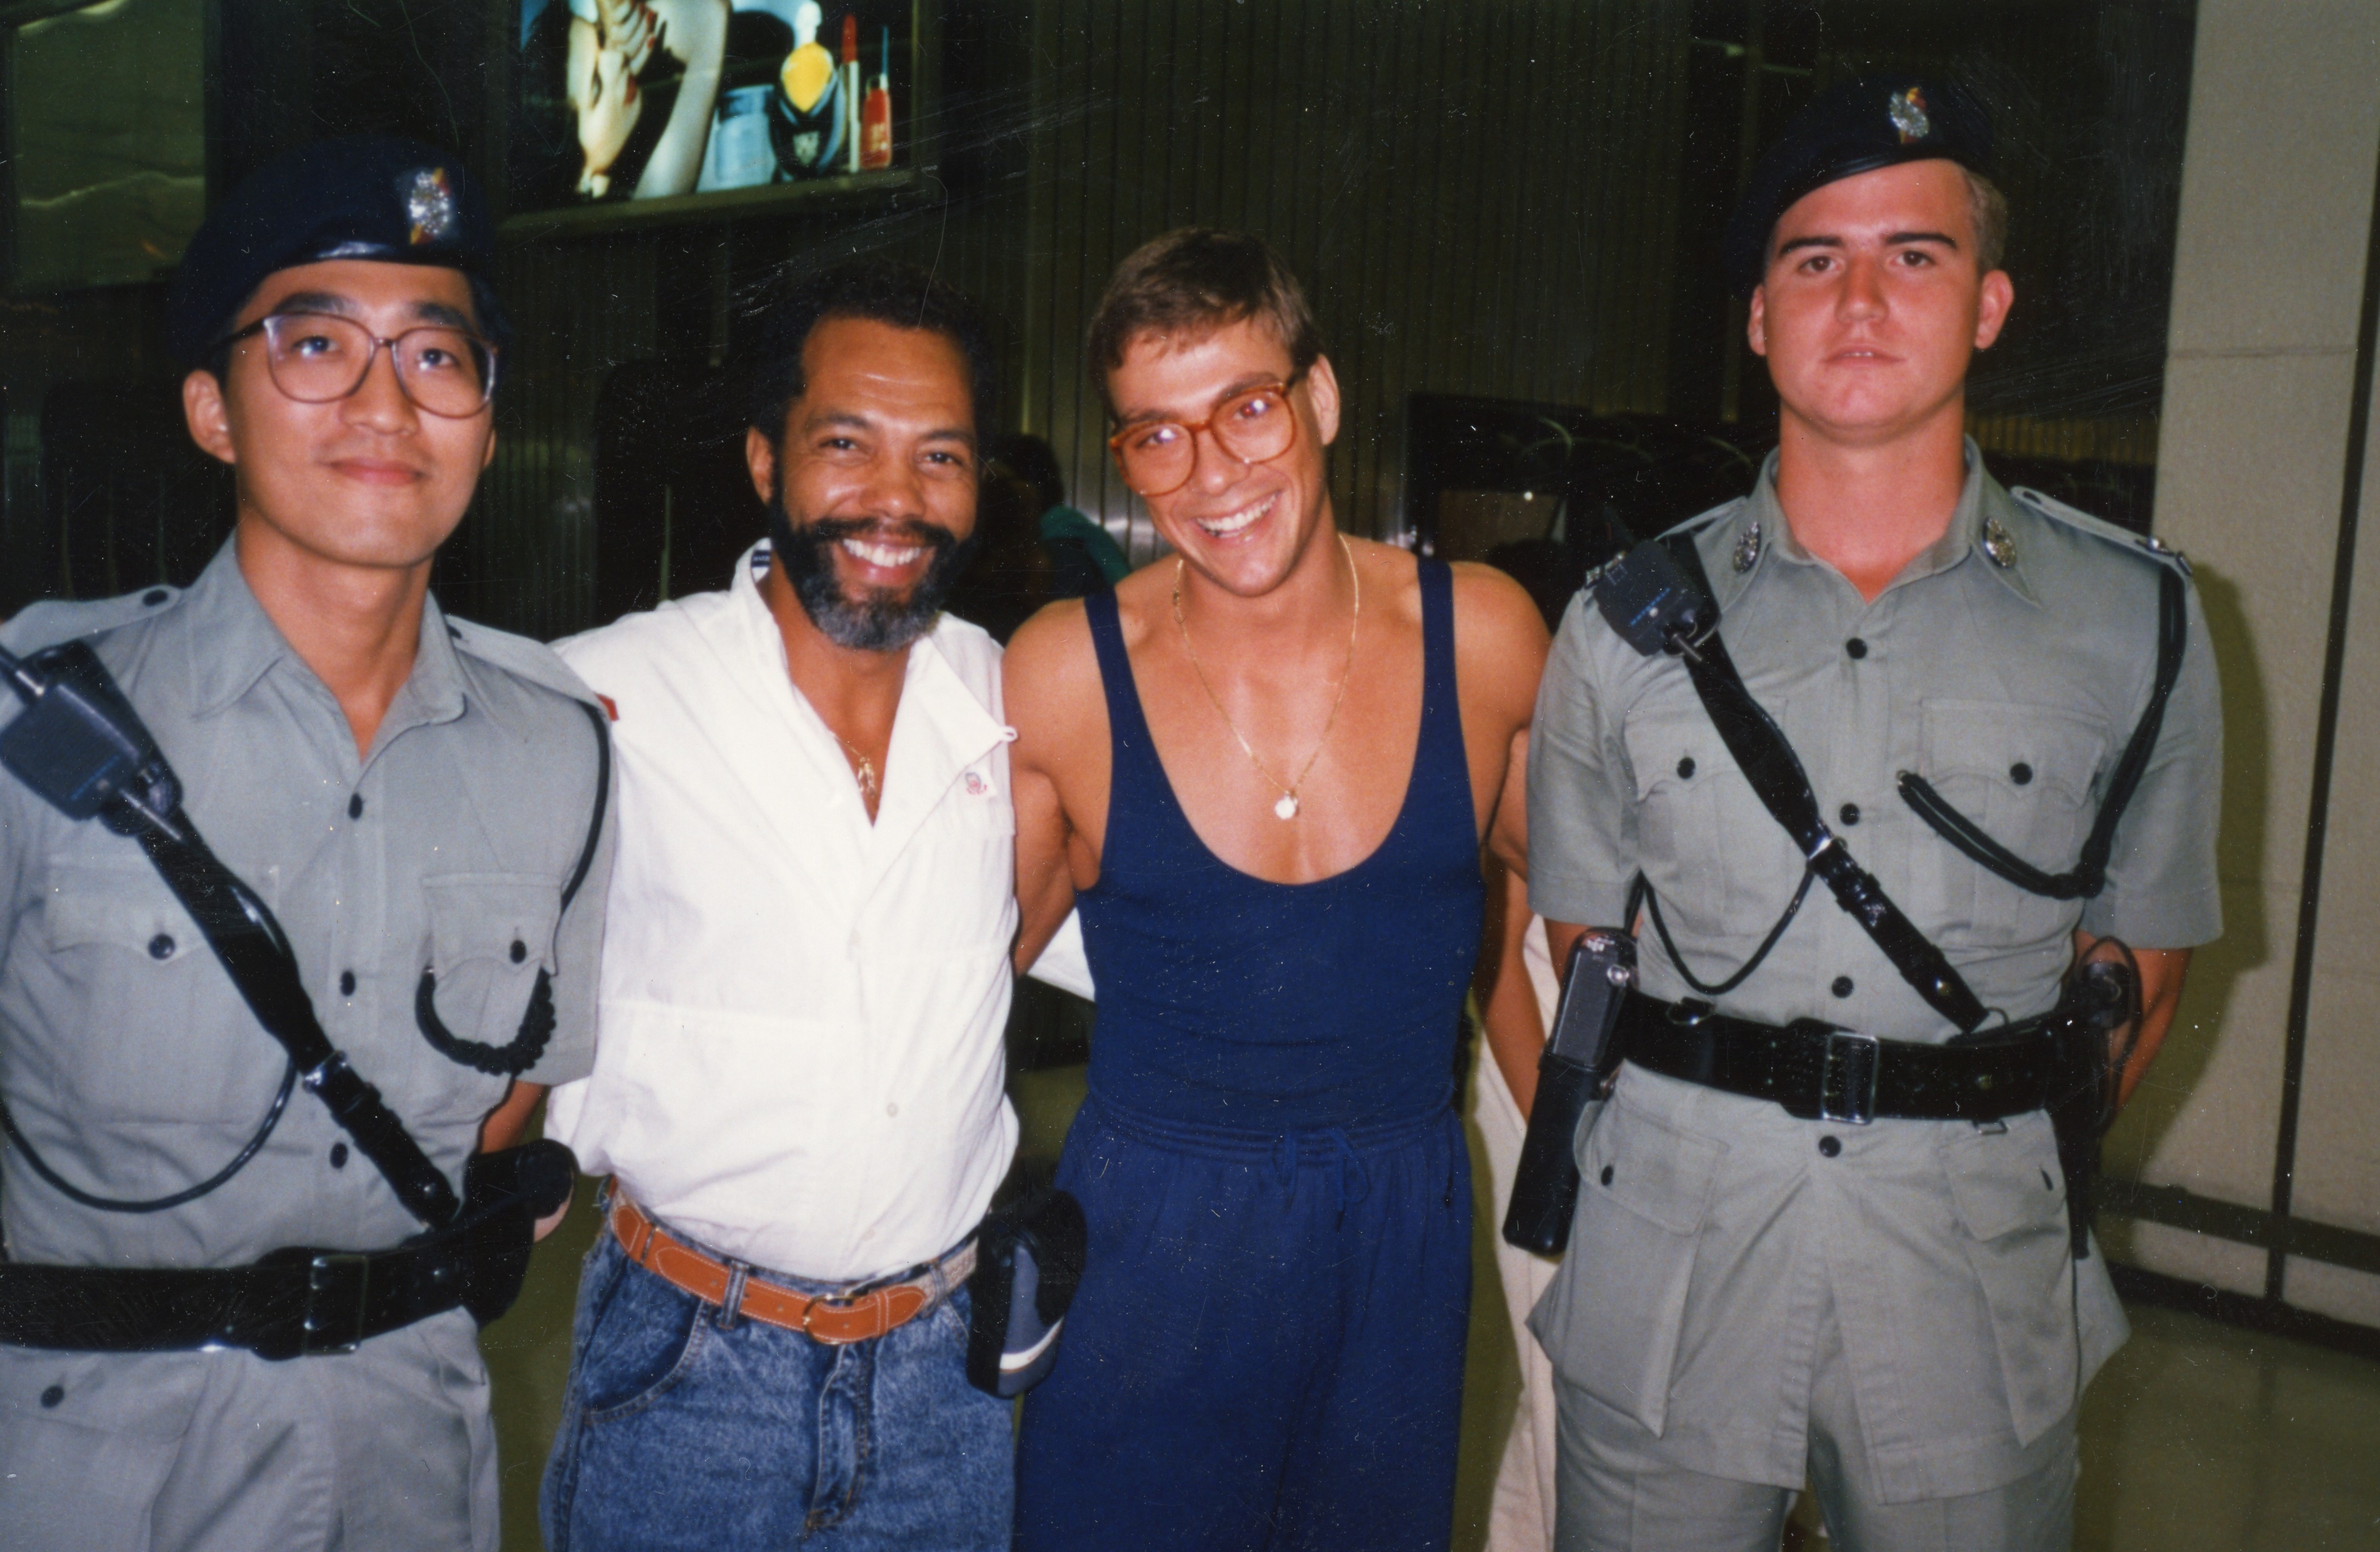 Jean Claude Van Damm and Haskell Vaughn Anderson III with 2 Hong Kong Police Officers after filming in Hong Kong of 'KICKBOXER'